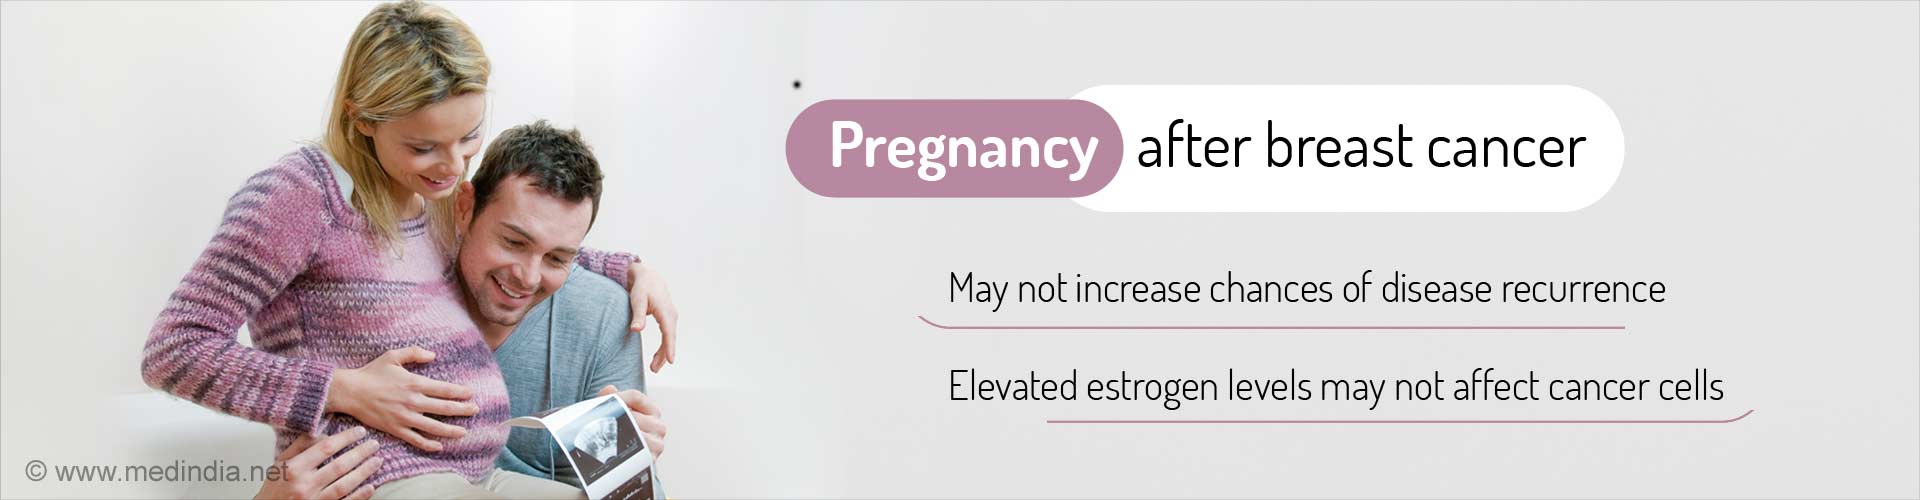 Pregnancy after breast cancer
- May not increase chances of disease recurrence
- Elevated estrogen levels may not affect cancer cells